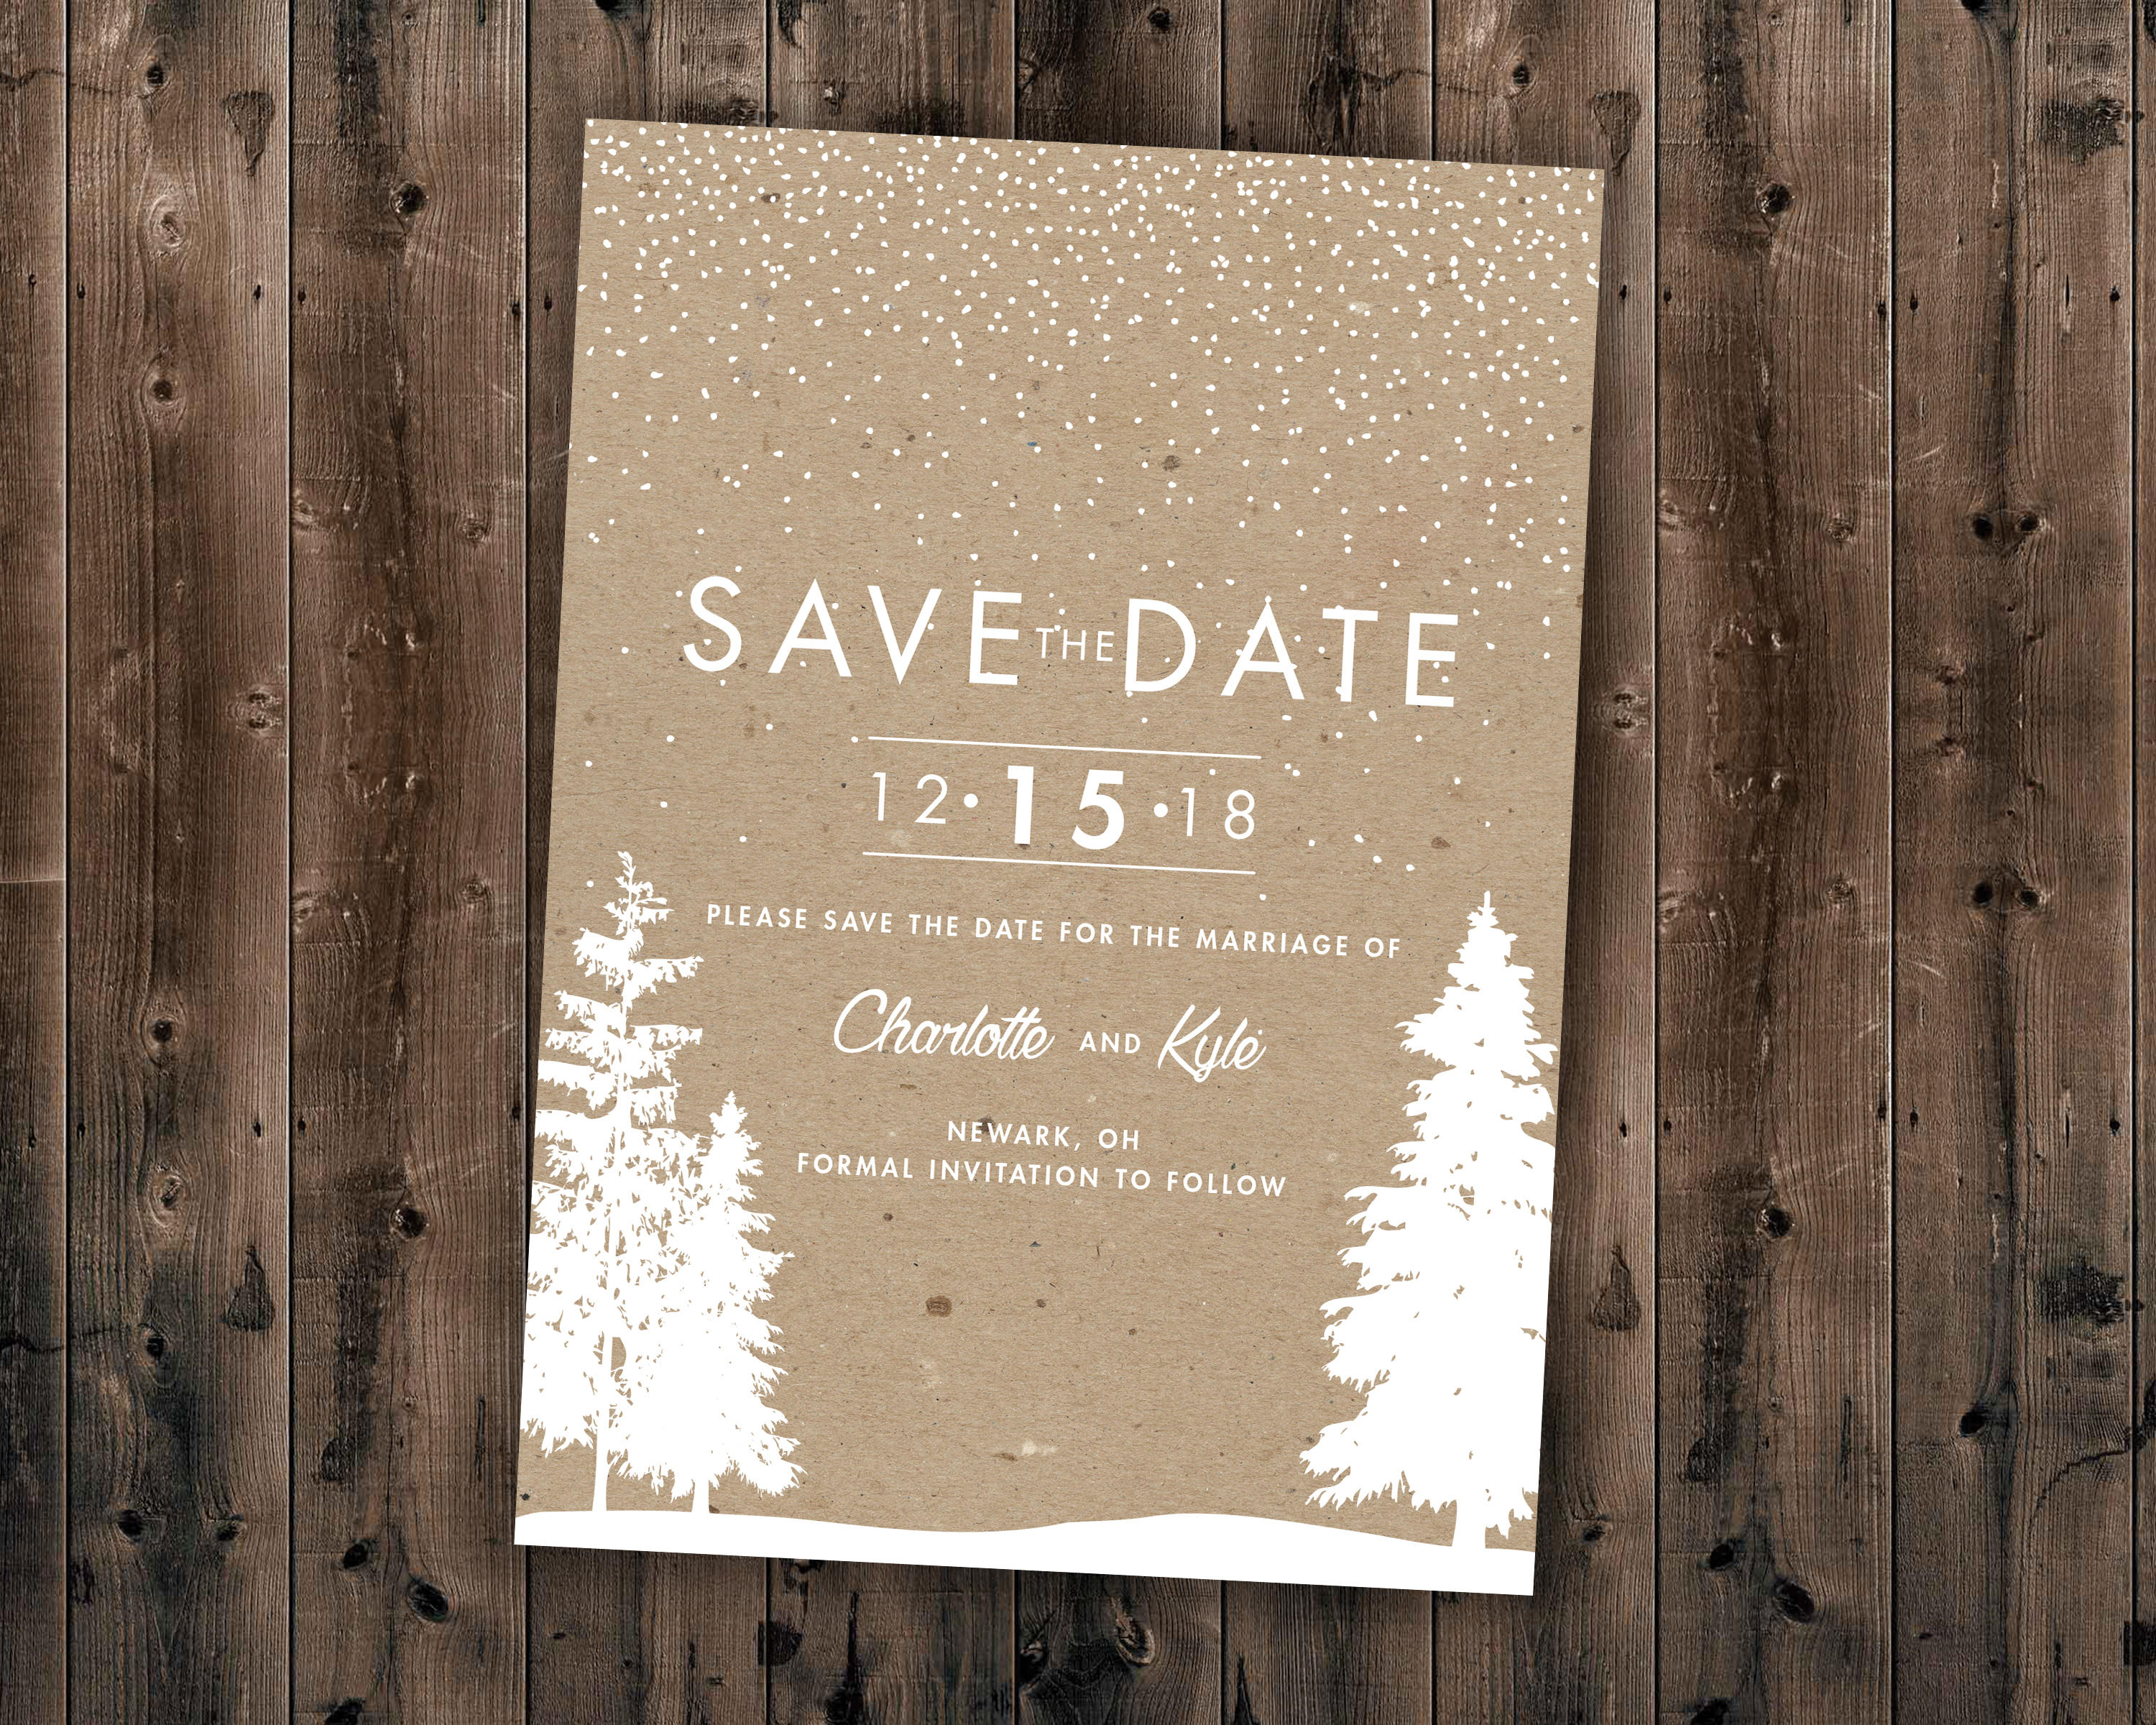 Winter Wedding Save The Date Printed, Snow, Woodsy, Rustic, Tree, Cheap, Woods, Affordable, Kraft, December, January, Christmas